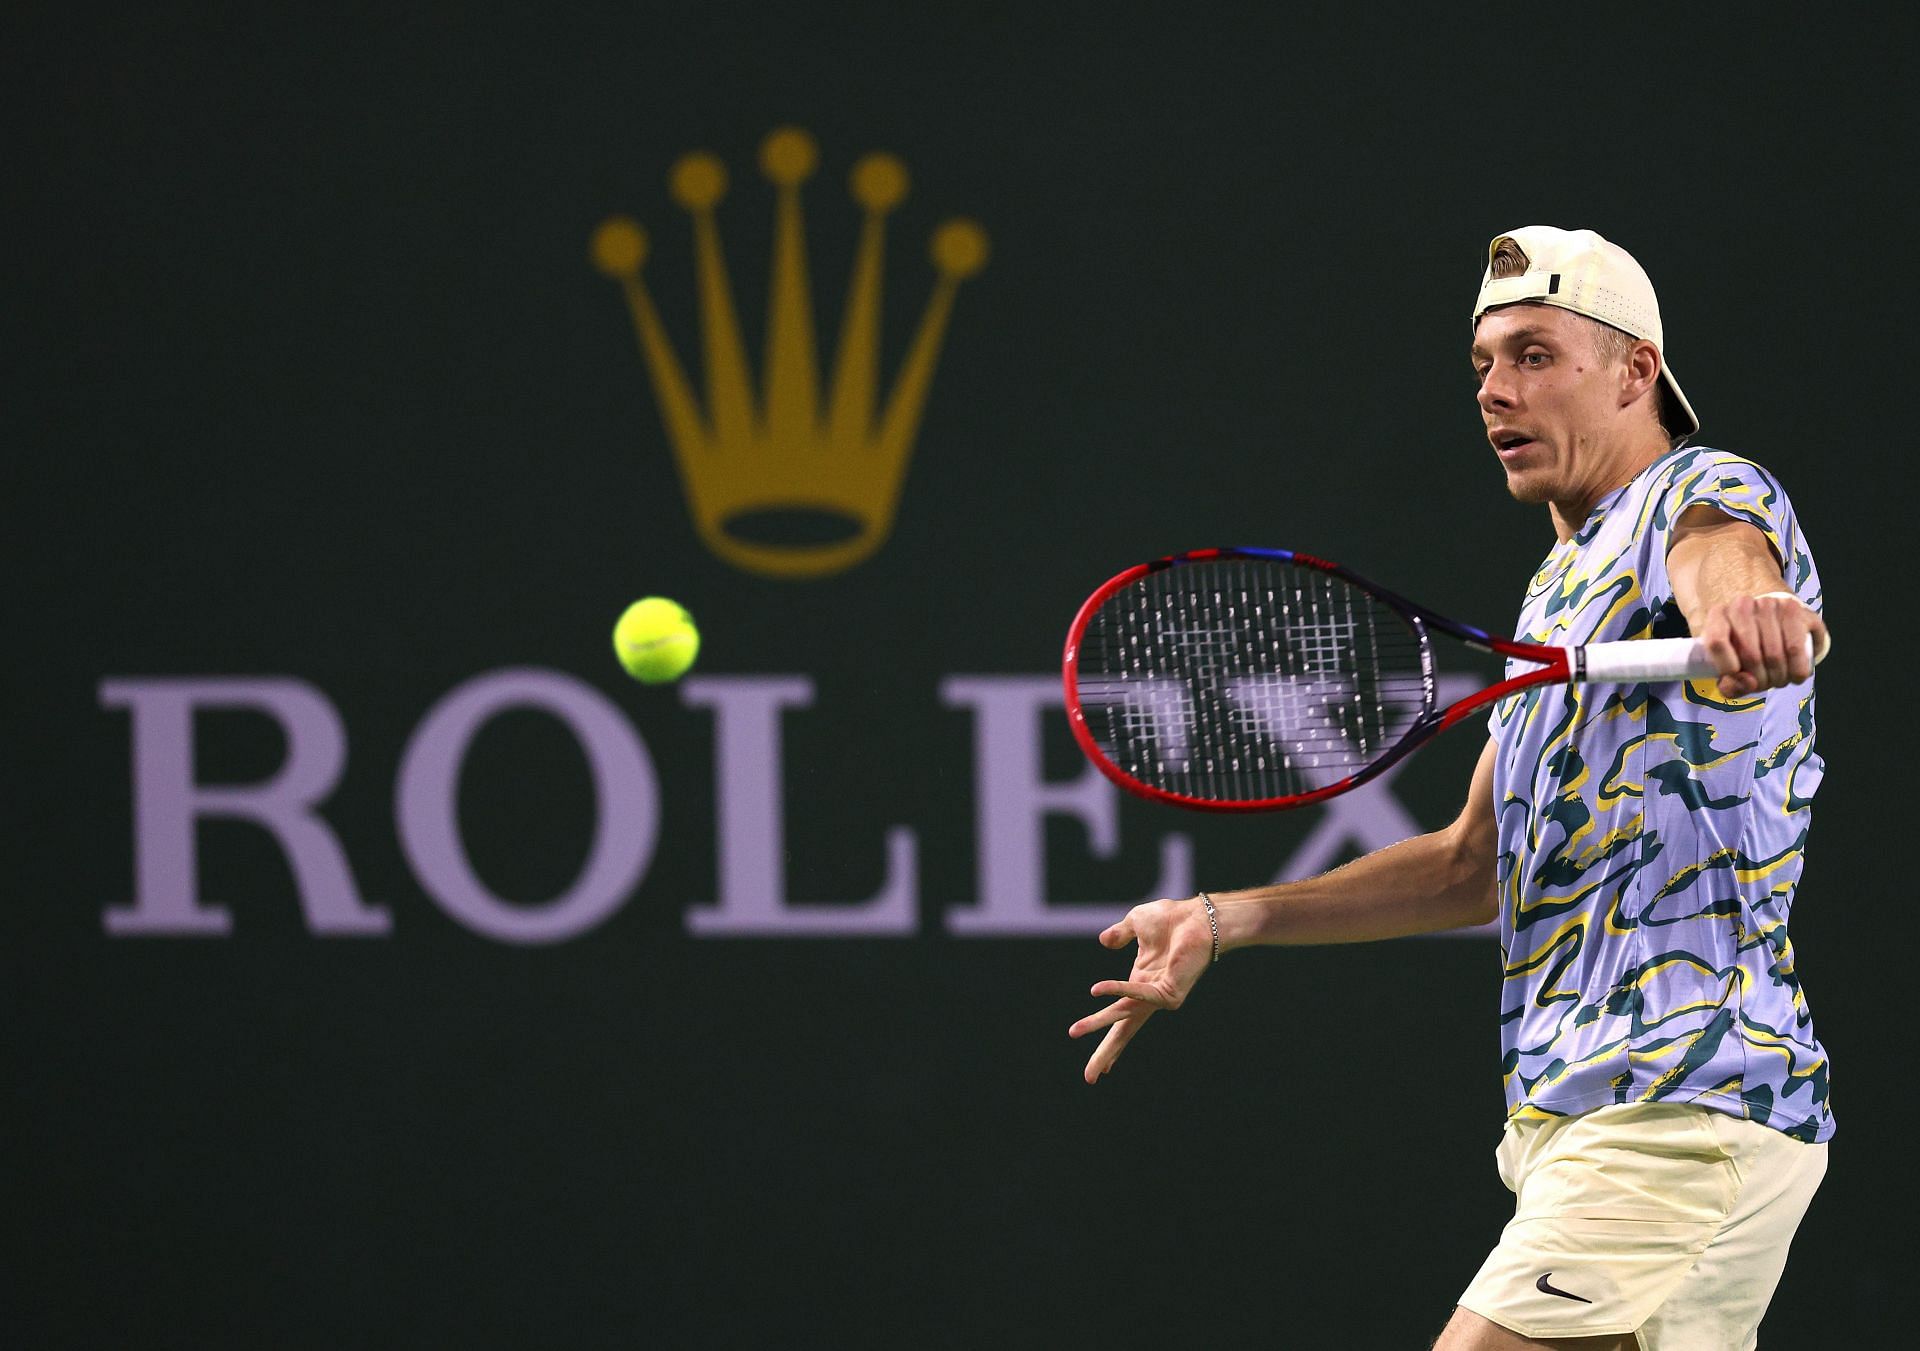 Denis Shapovalov will contest Miami Open on the back of an opening-match defeat at Indian Wells